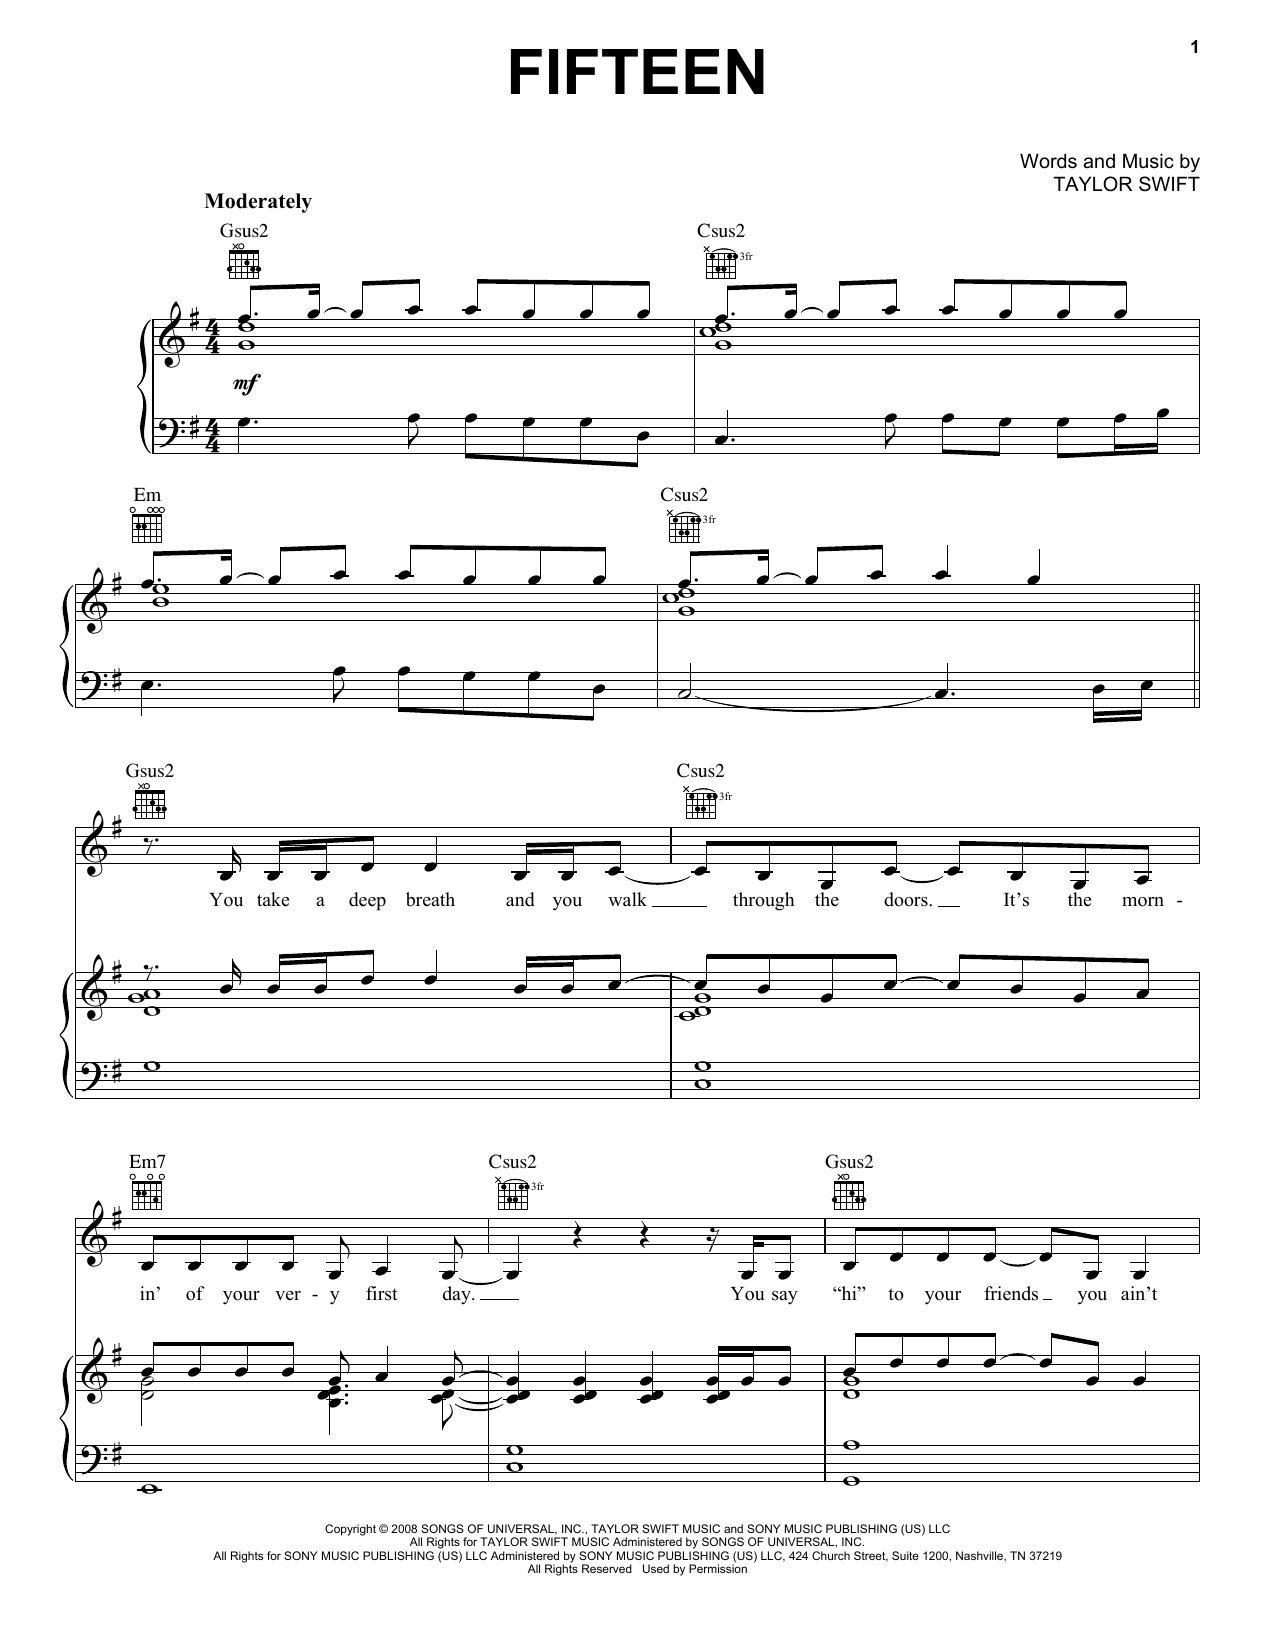 Taylor Swift Fifteen sheet music preview music notes and score for Piano including 5 page(s)